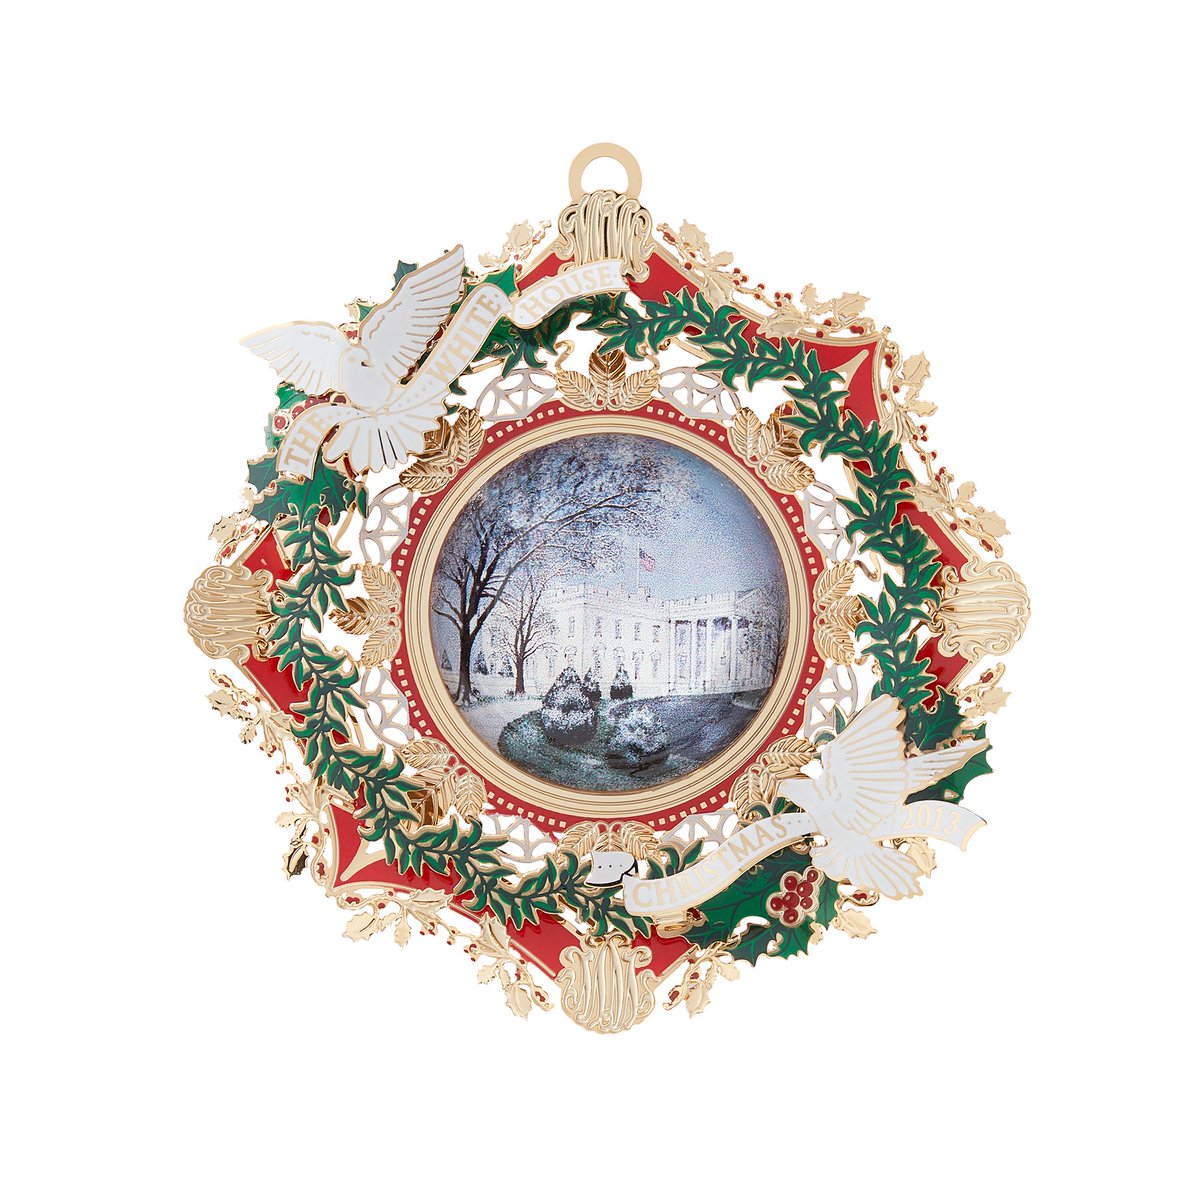 Until April 30th, our Official 2013 White House Christmas Ornament is only $10! This ornament features an American Elm tree planted by President Woodrow Wilson on the White House North Lawn on December 18, 1913. Shop now: shop.whitehousehistory.org/collections/or… #ArborDay